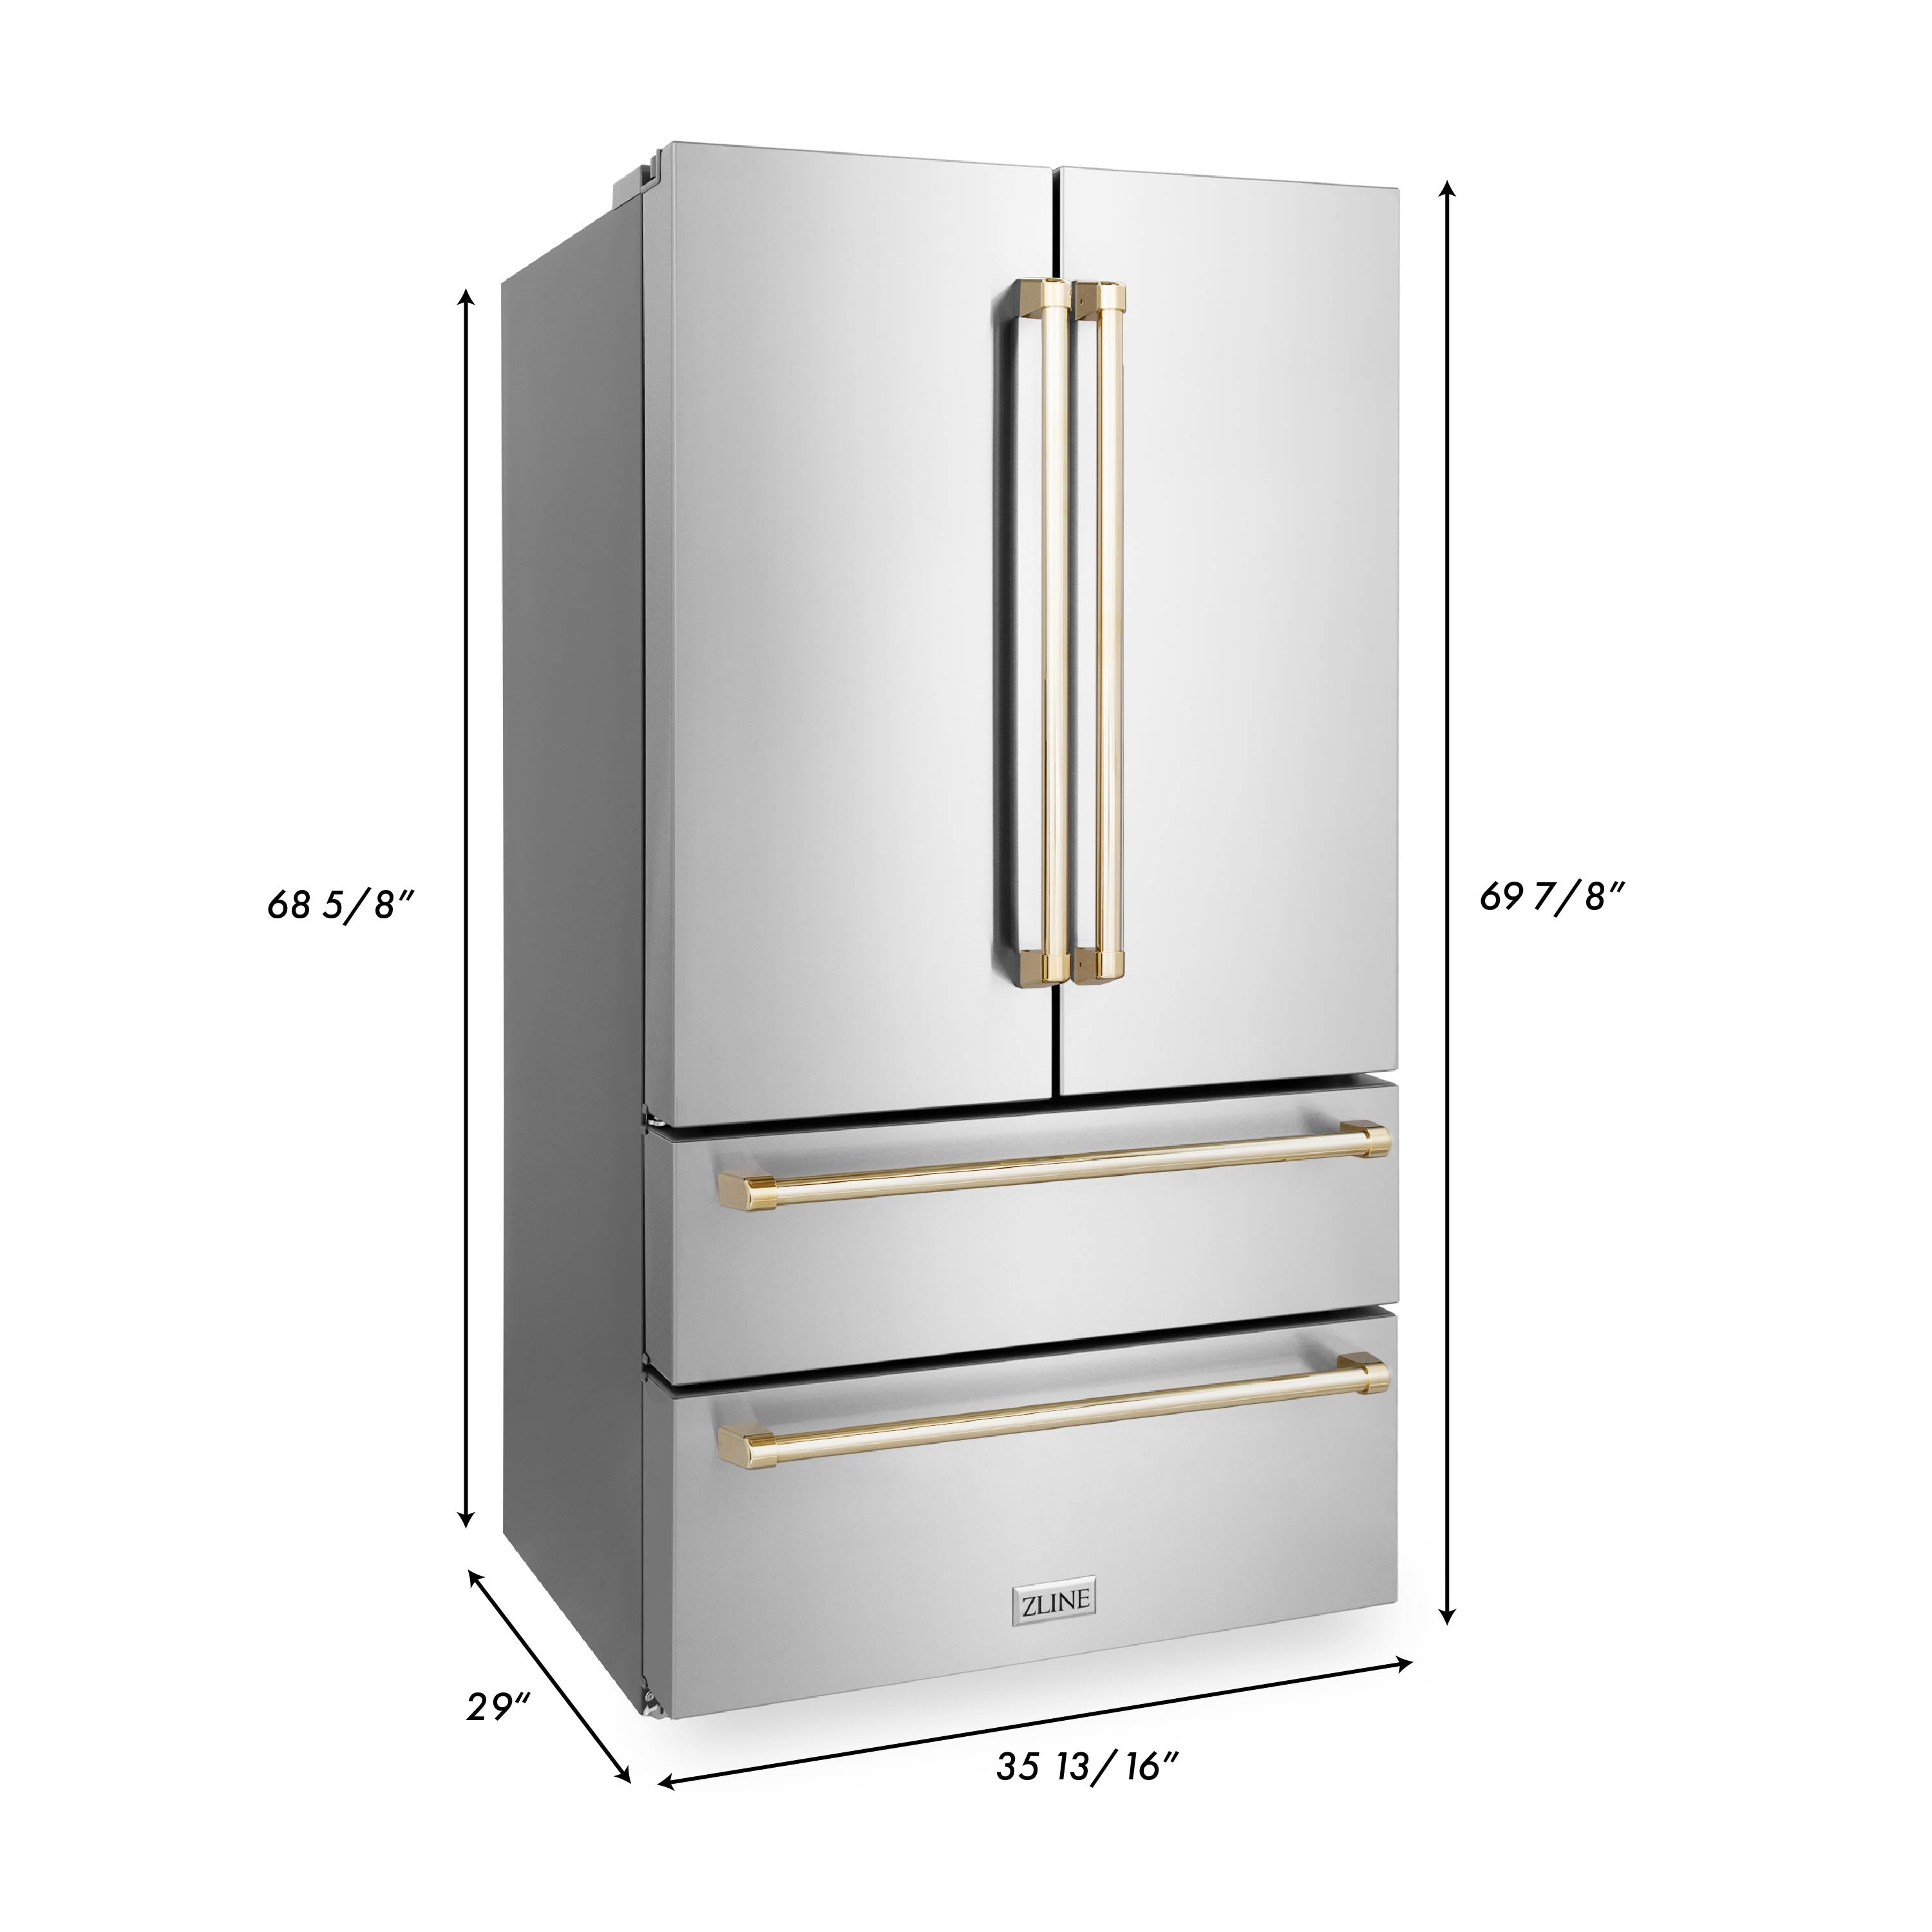 ZLINE Autograph Edition 36 in. Kitchen Package with Stainless Steel Dual Fuel Range, Range Hood, Dishwasher and Refrigeration with Polished Gold Accents (4KAPR-RARHDWM36-G) dimensional diagram with measurements.